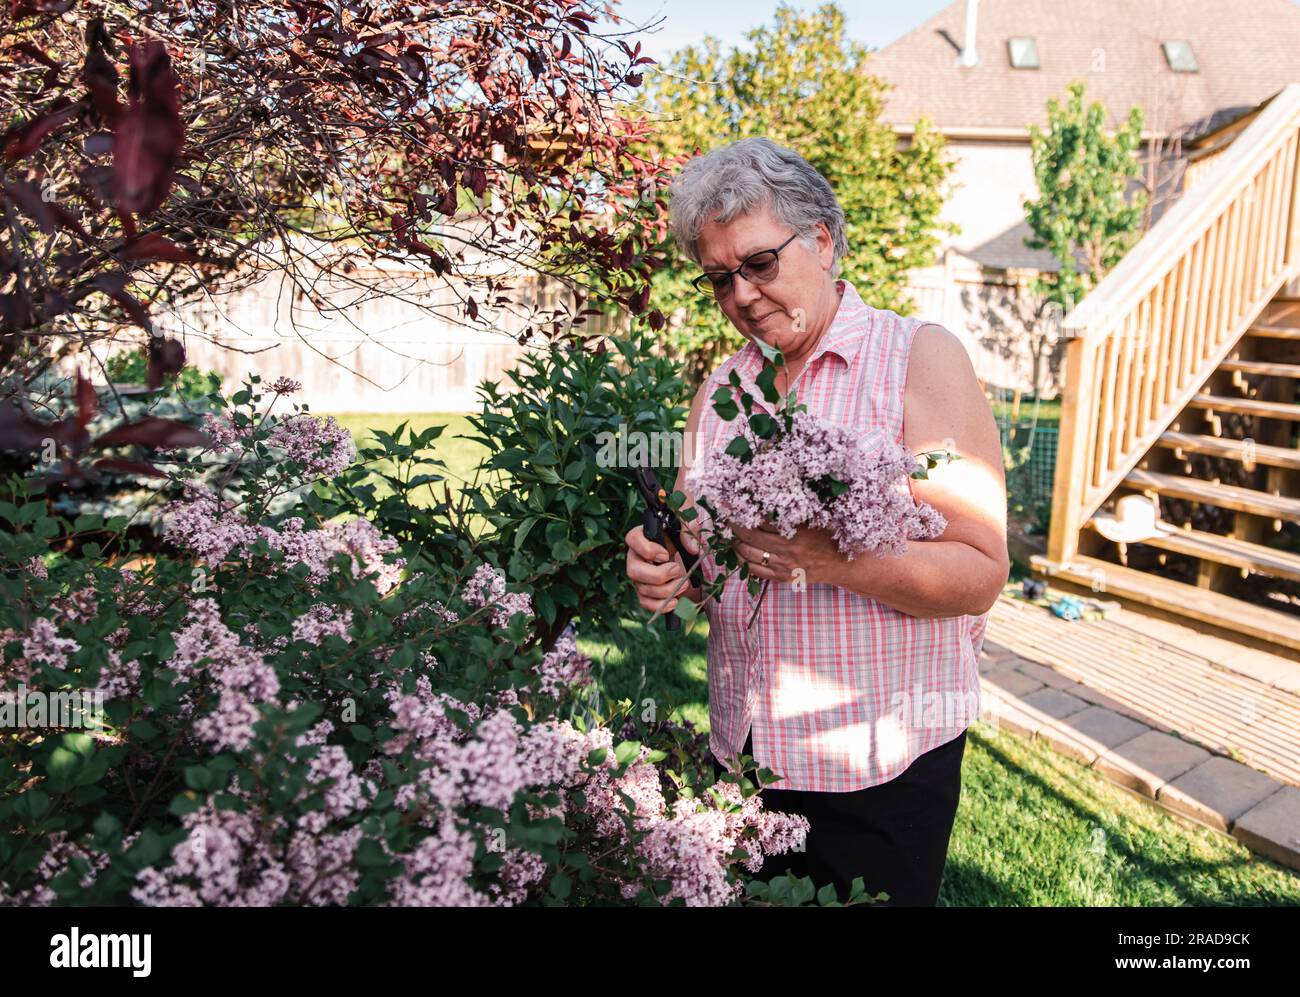 Older woman cutting lilac flowers off of lilac shrub with pruners. Stock Photo